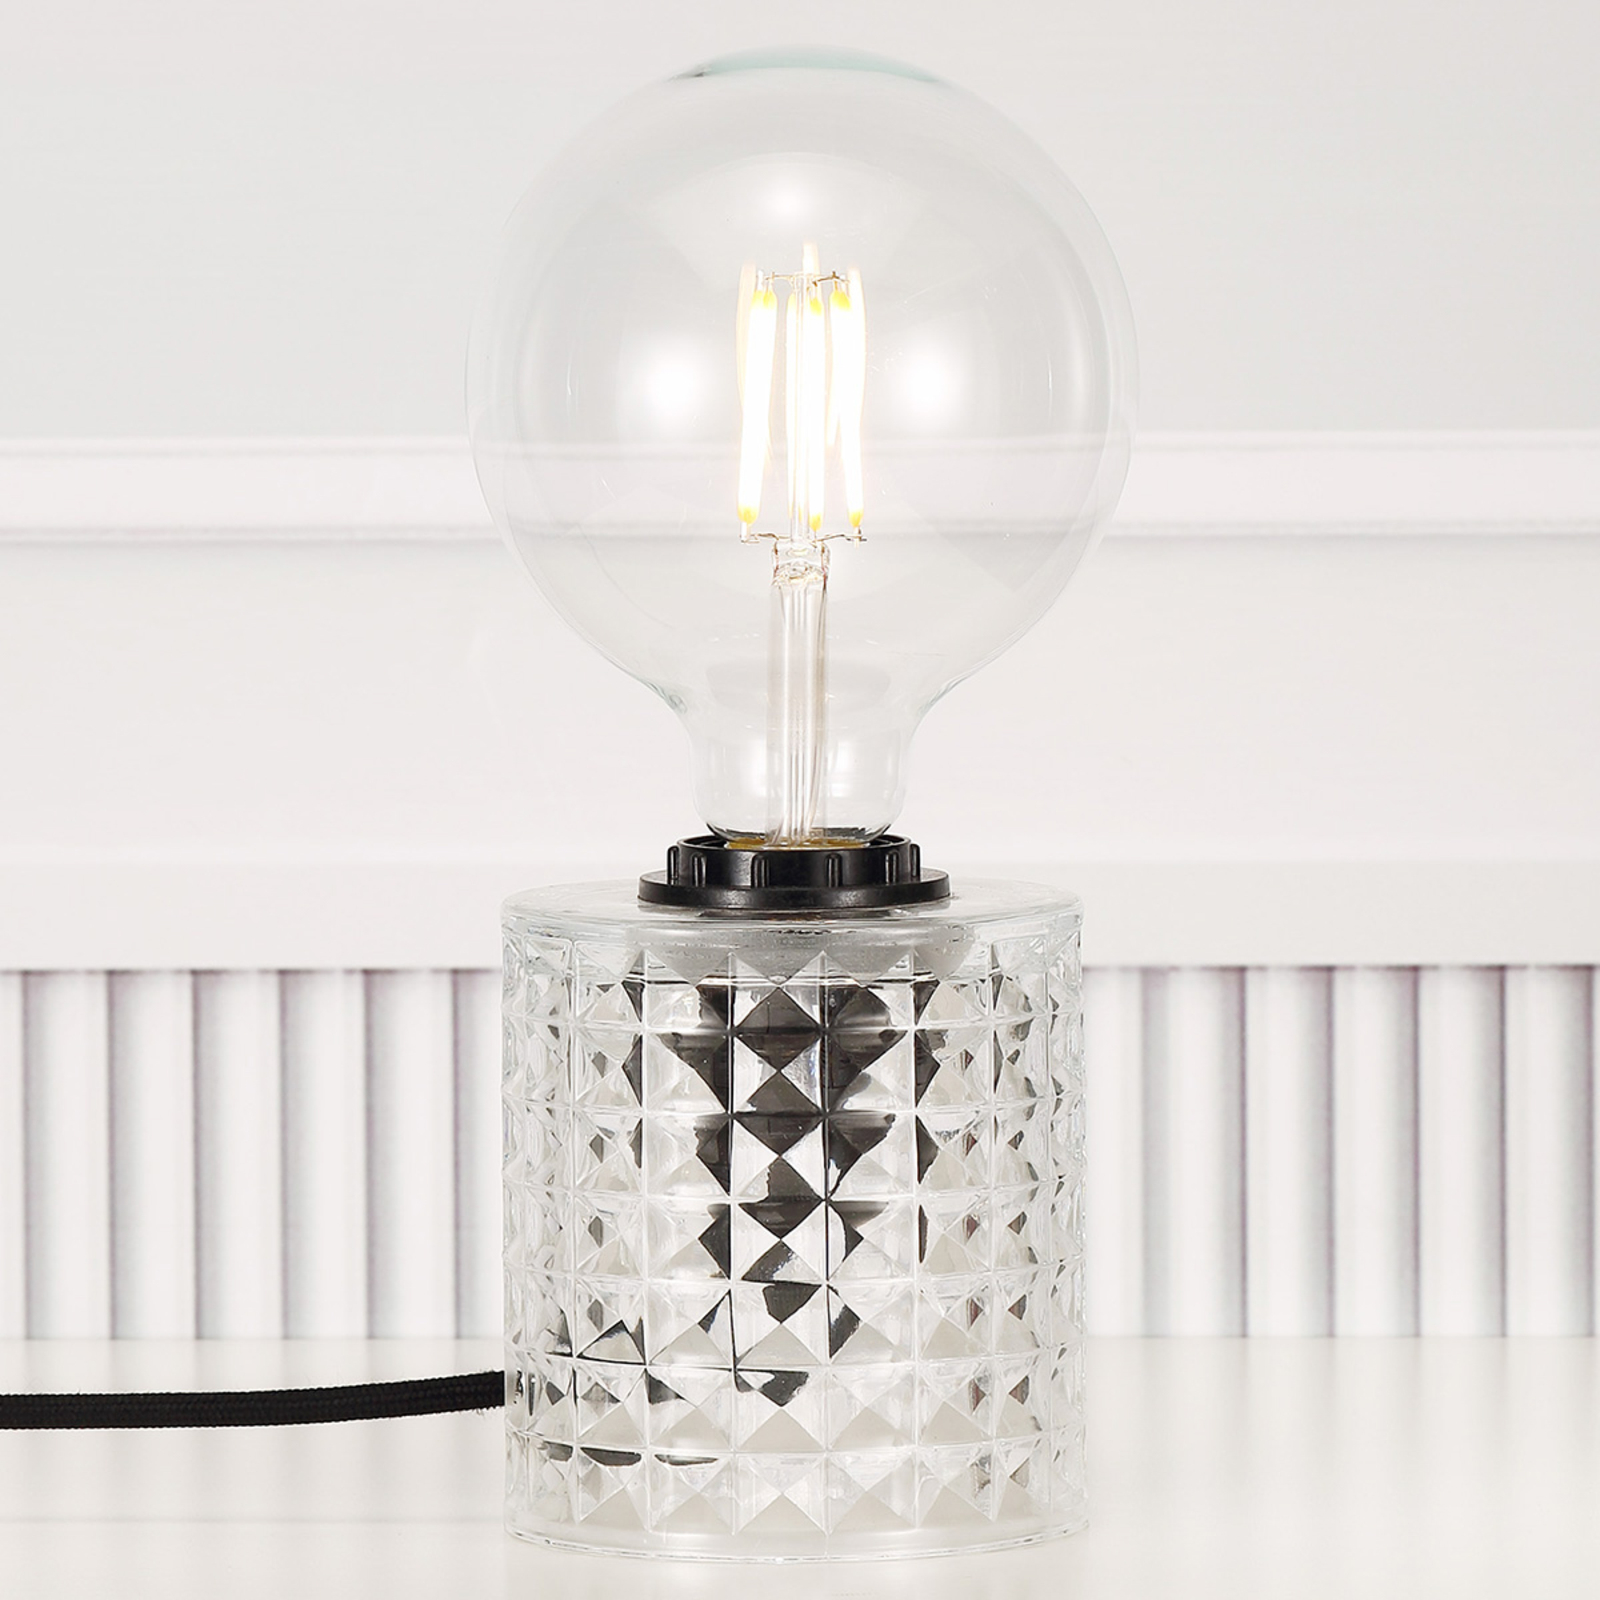 Made of glass - Hollywood table lamp clear